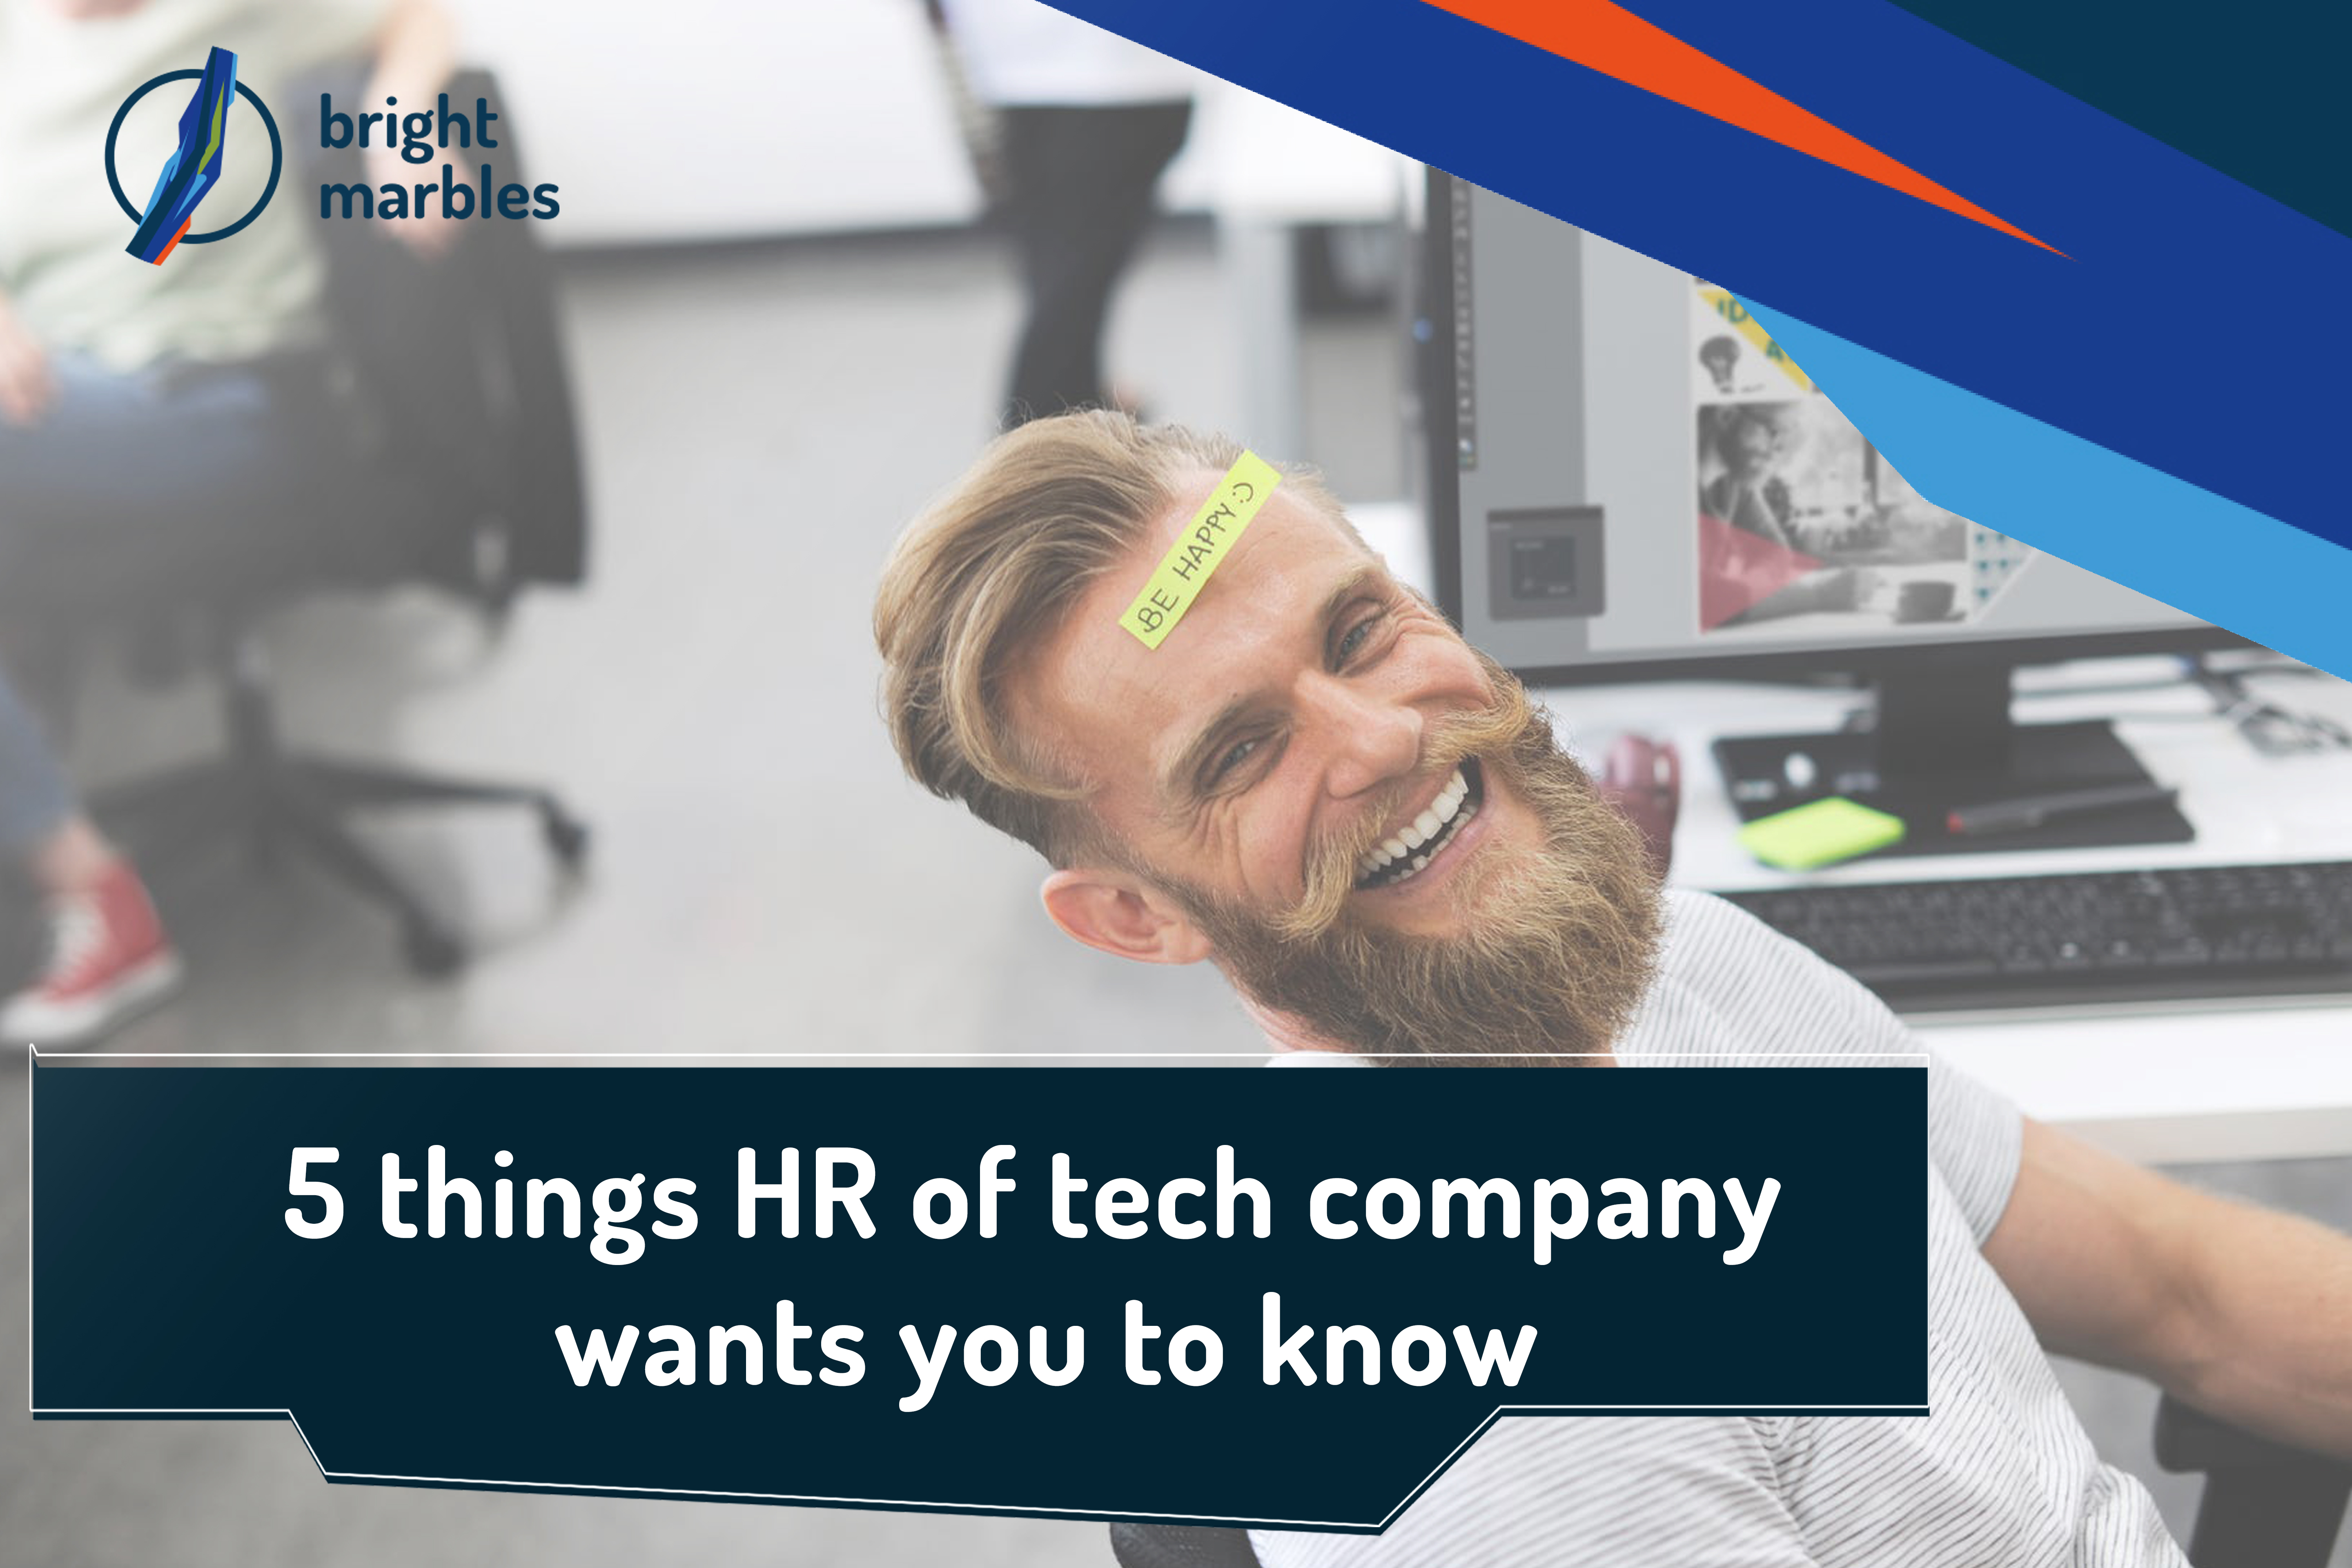 5 things HR of tech company wants you to know